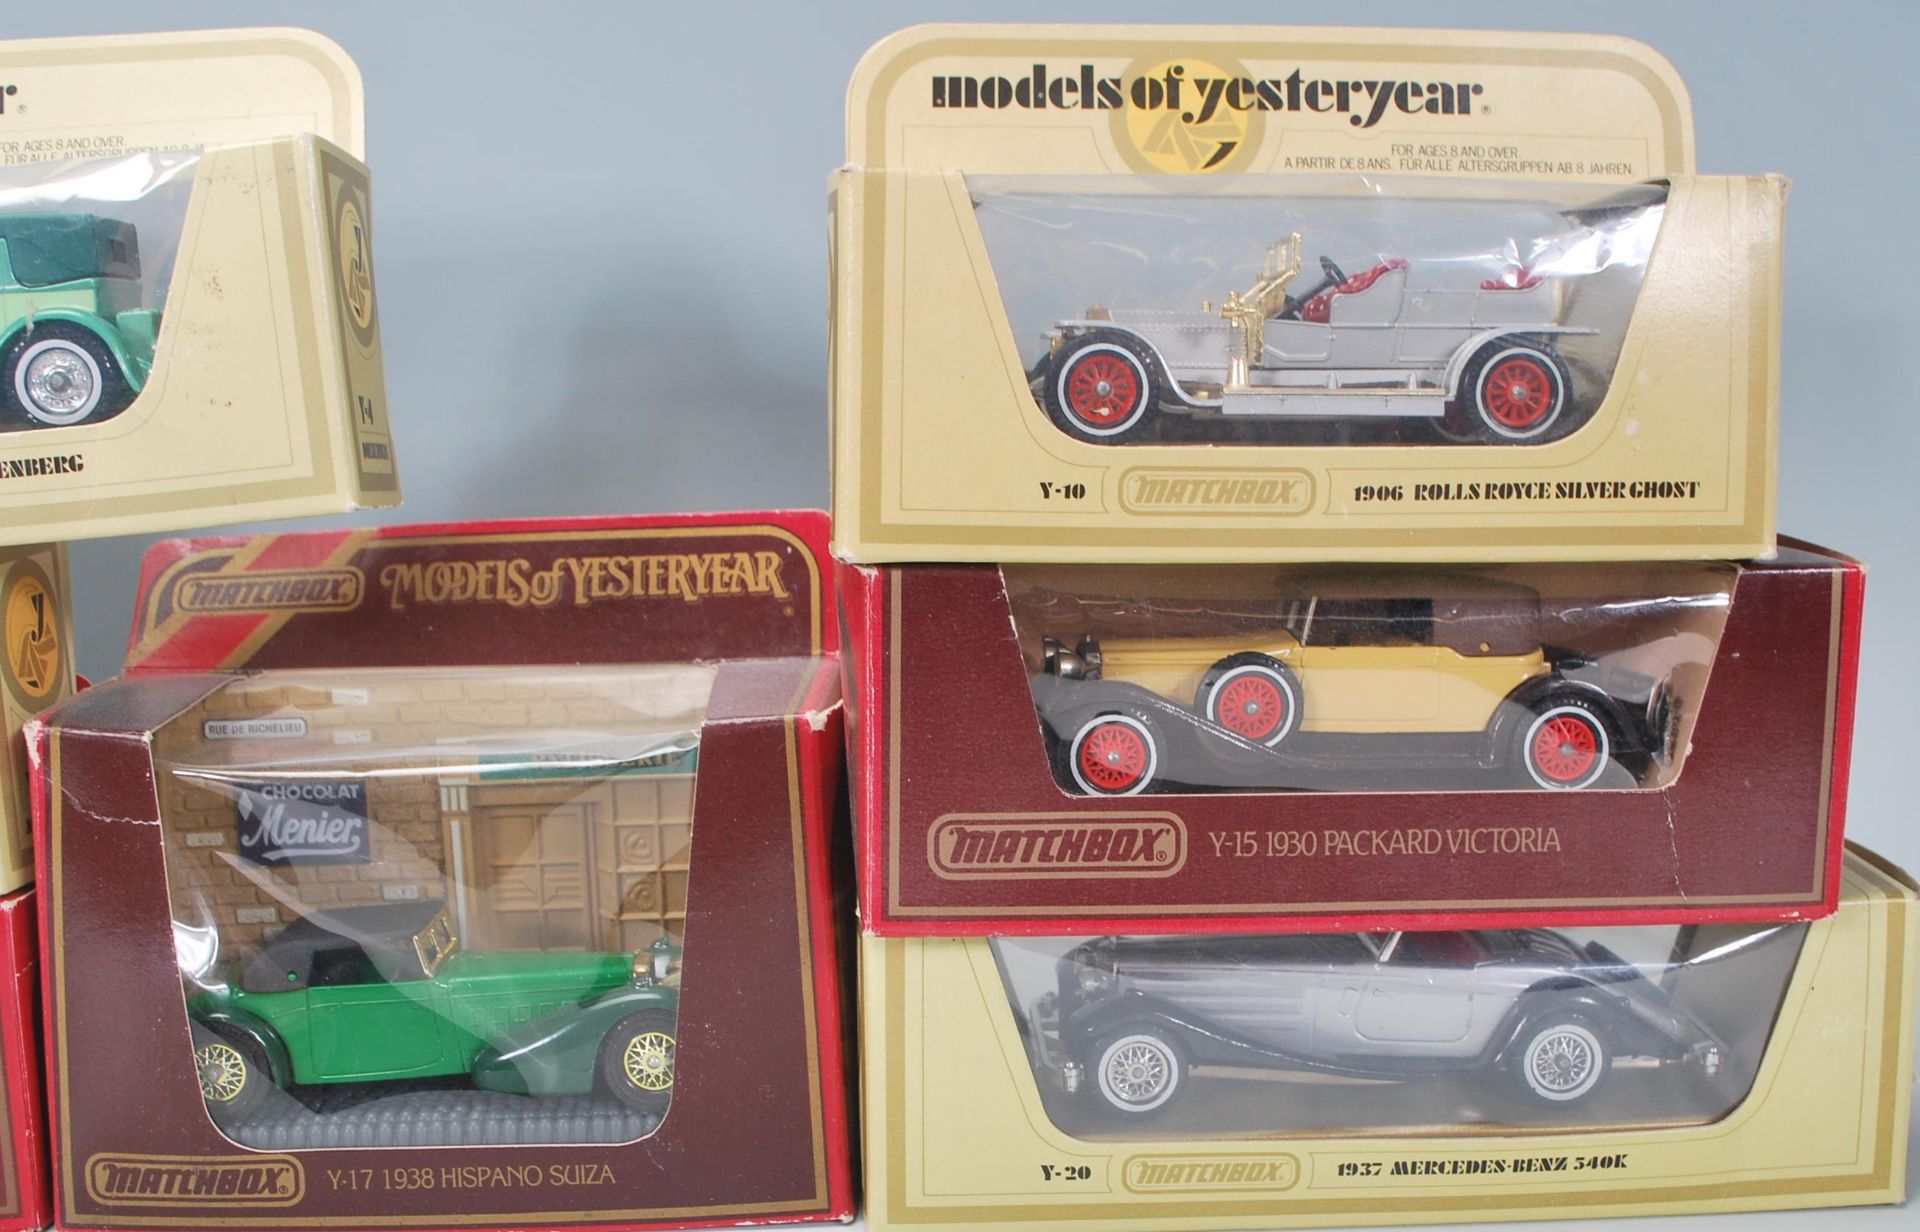 A collection of 12x original vintage Matchbox Models of yesteryear Y-collection including a Y-24 - Bild 6 aus 6